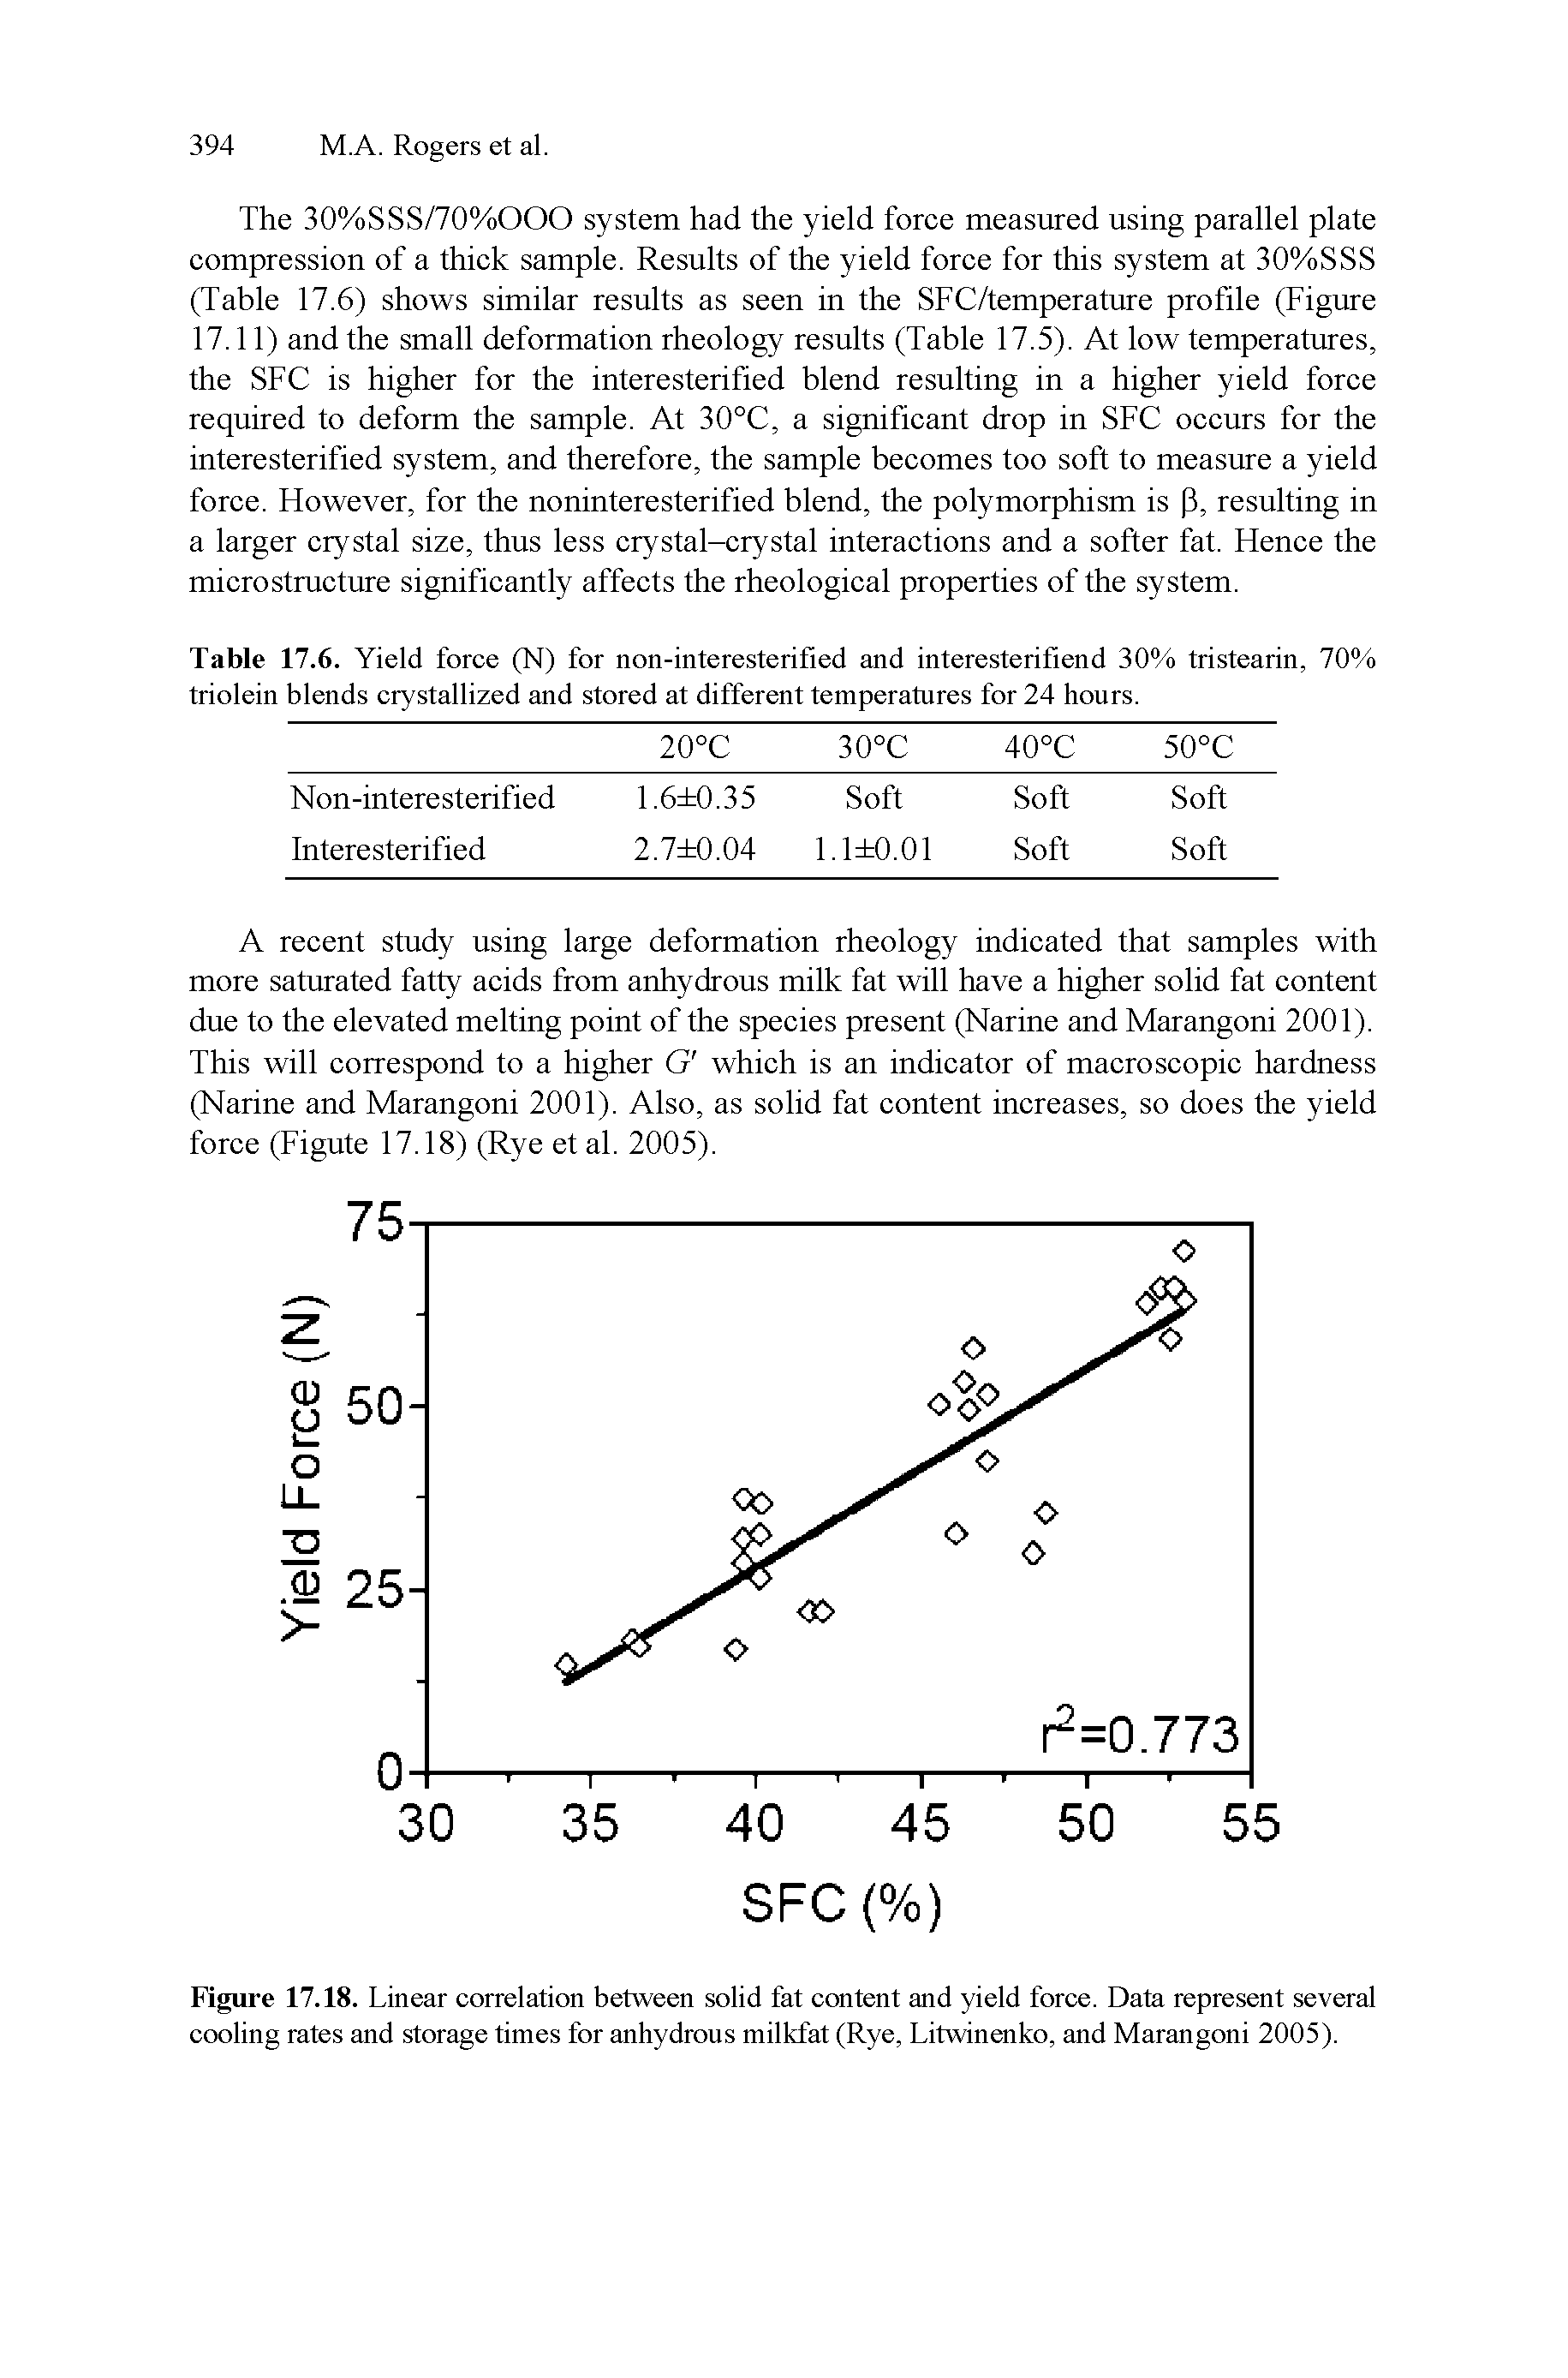 Figure 17.18. Linear correlation between solid fat content and yield force. Data represent several cooling rates and storage times for anhydrous milkfat (Rye, Litwinenko, and Marangoni 2005).